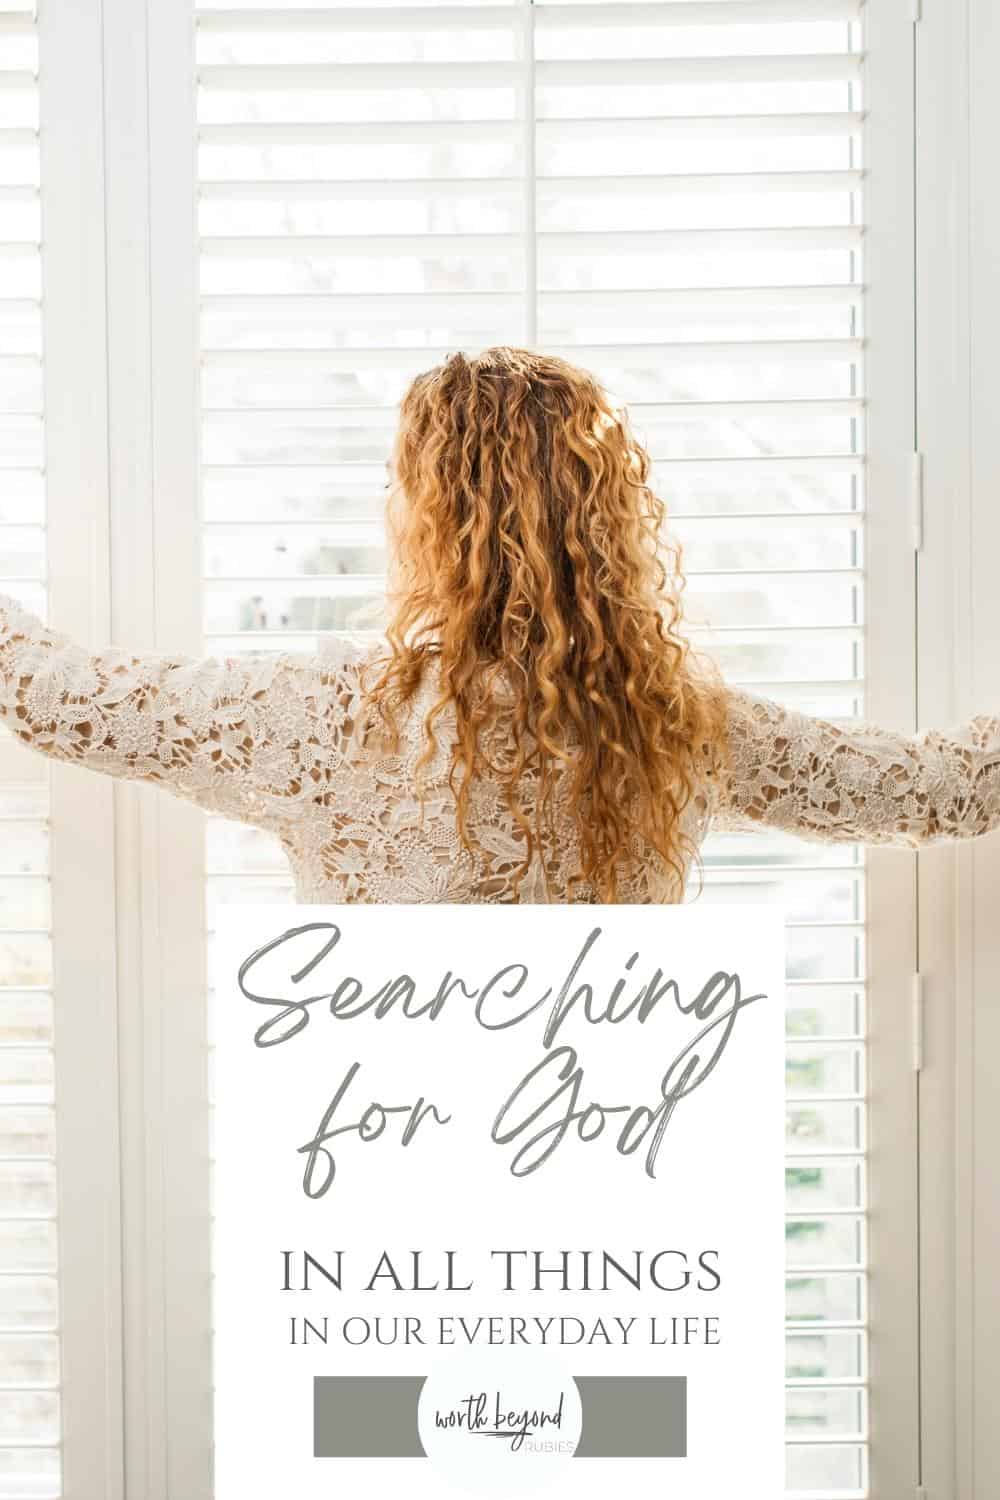 A woman with long curly blonde hair facing a window drawing back curtains and a text overlay that says Searching for God in All Things in Our Everyday Life and the Worth Beyond Rubies logo